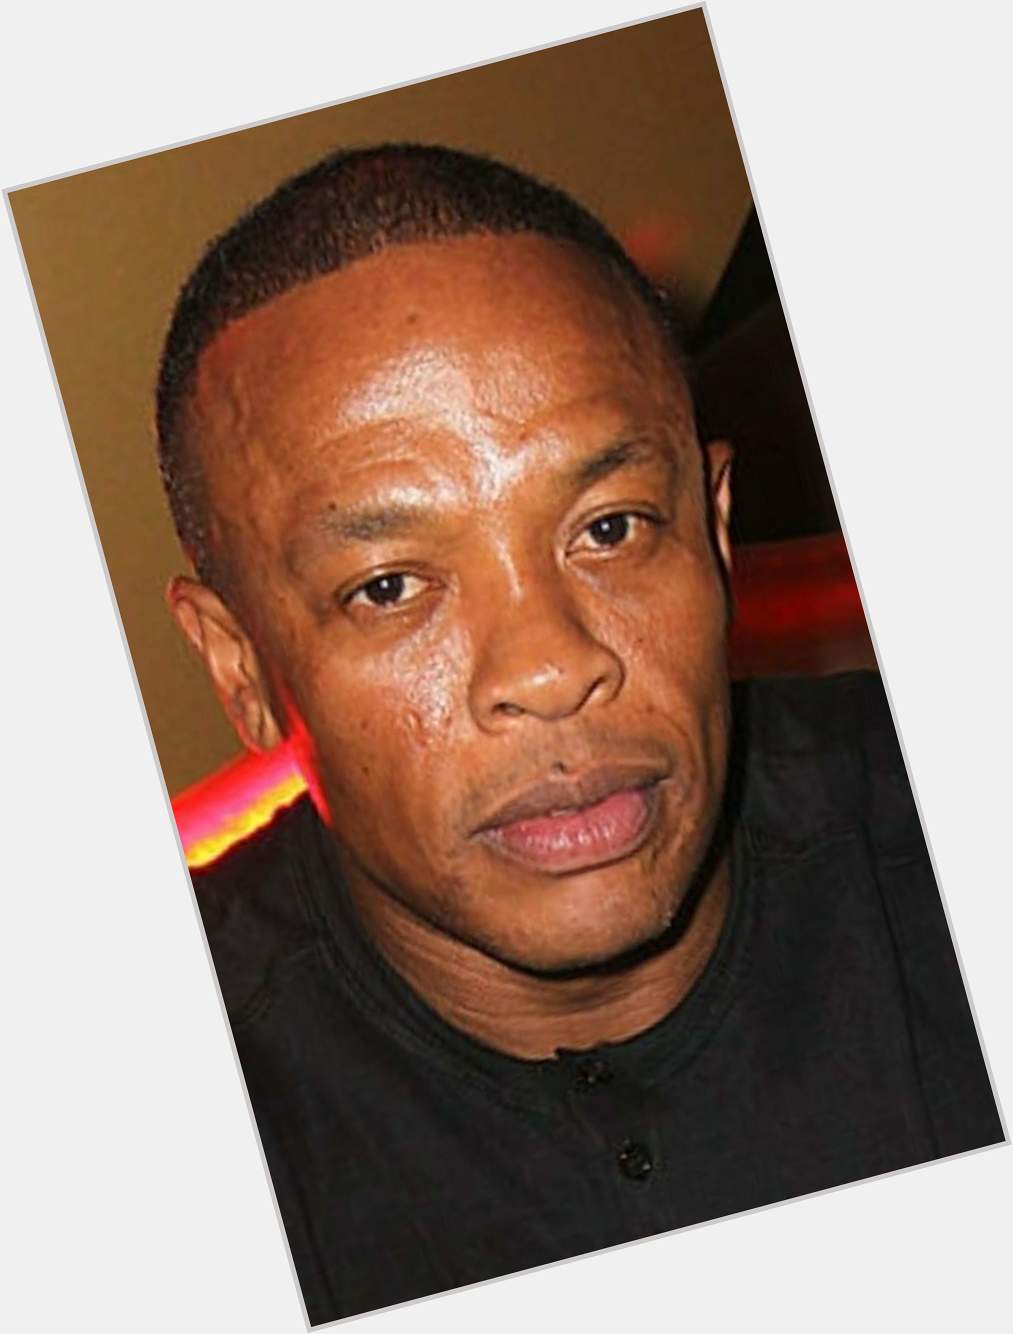  Happy Birthday to Dr Dre
He\s 56 years old today.
Let\s show him some love. 